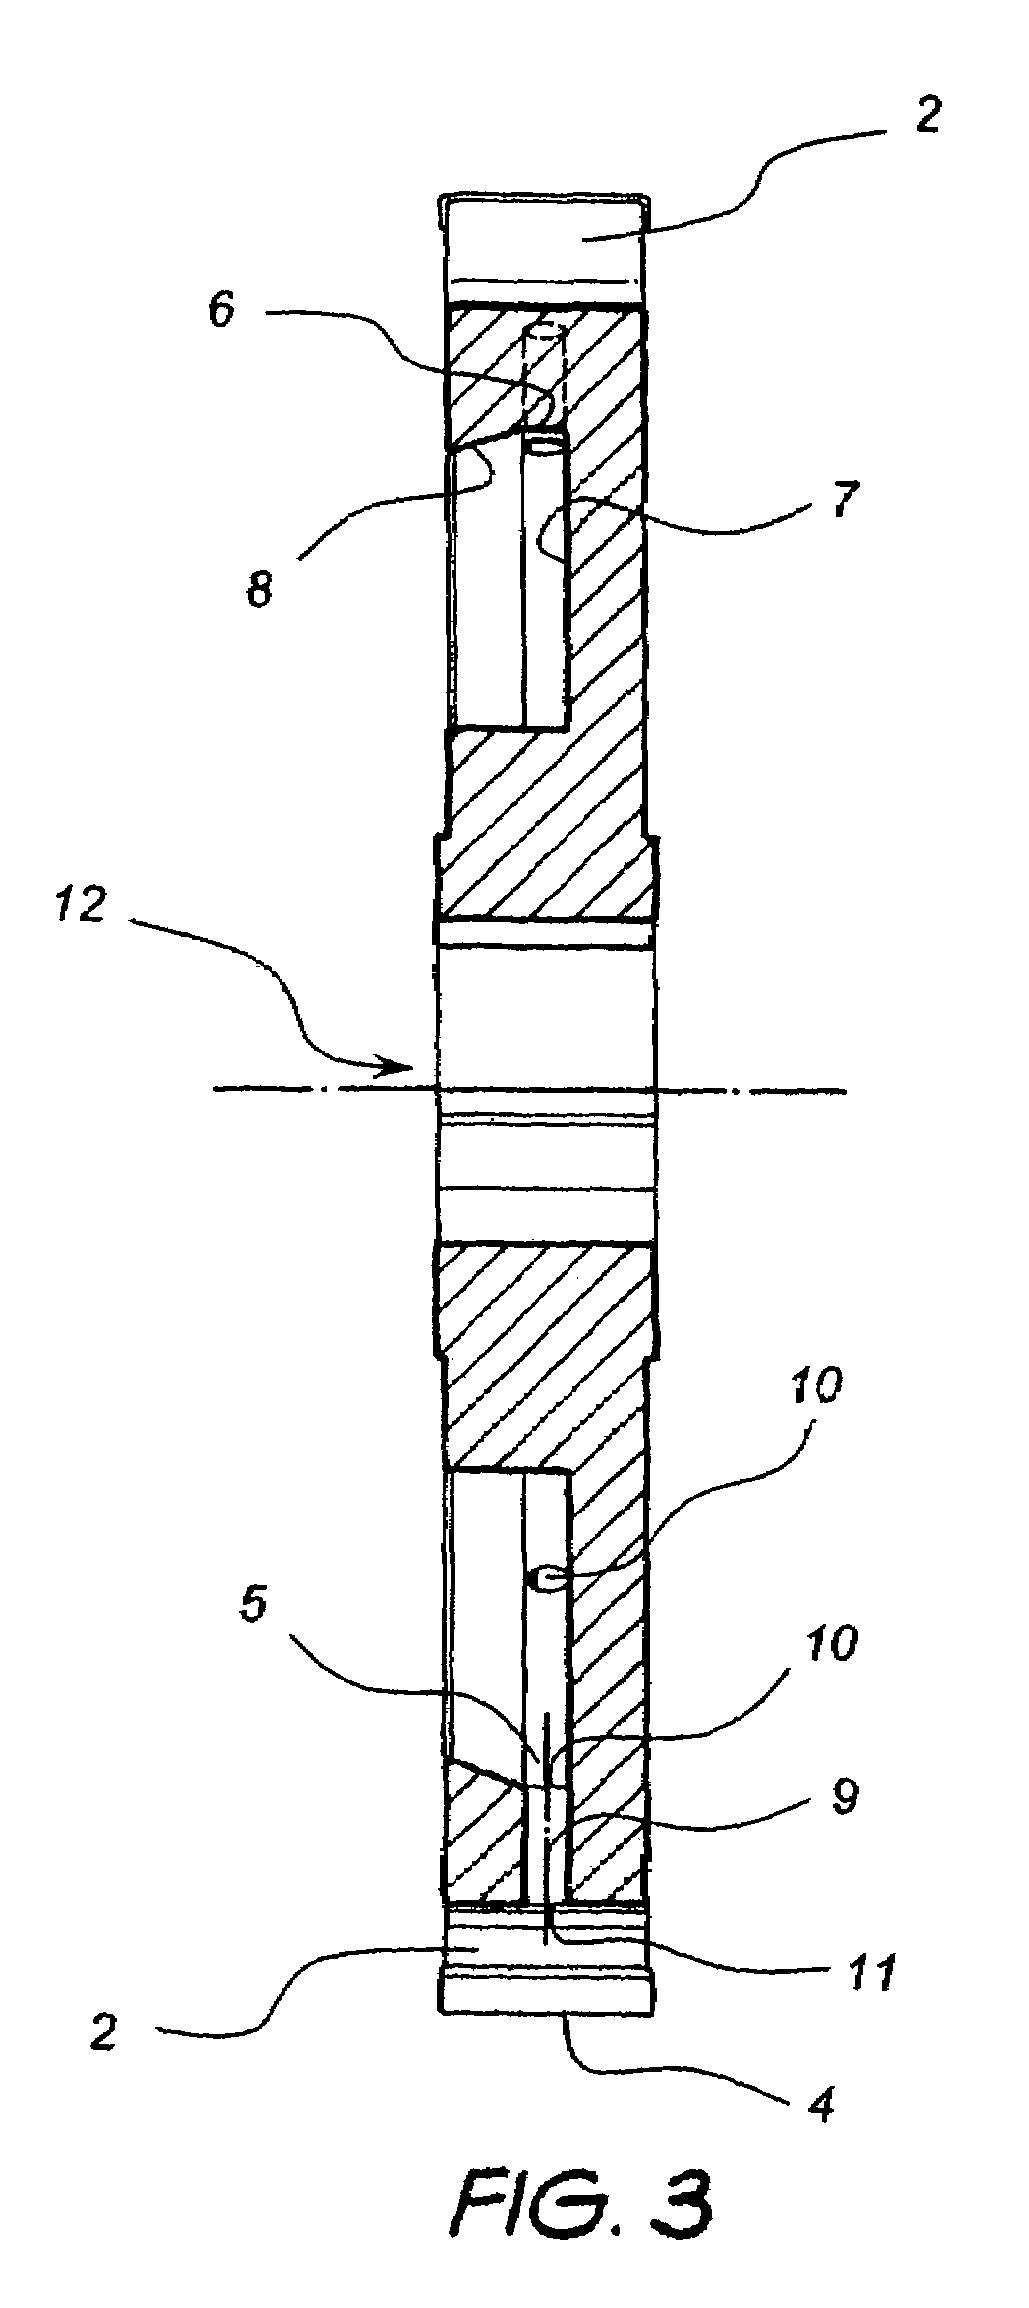 Cutting tool and method of use